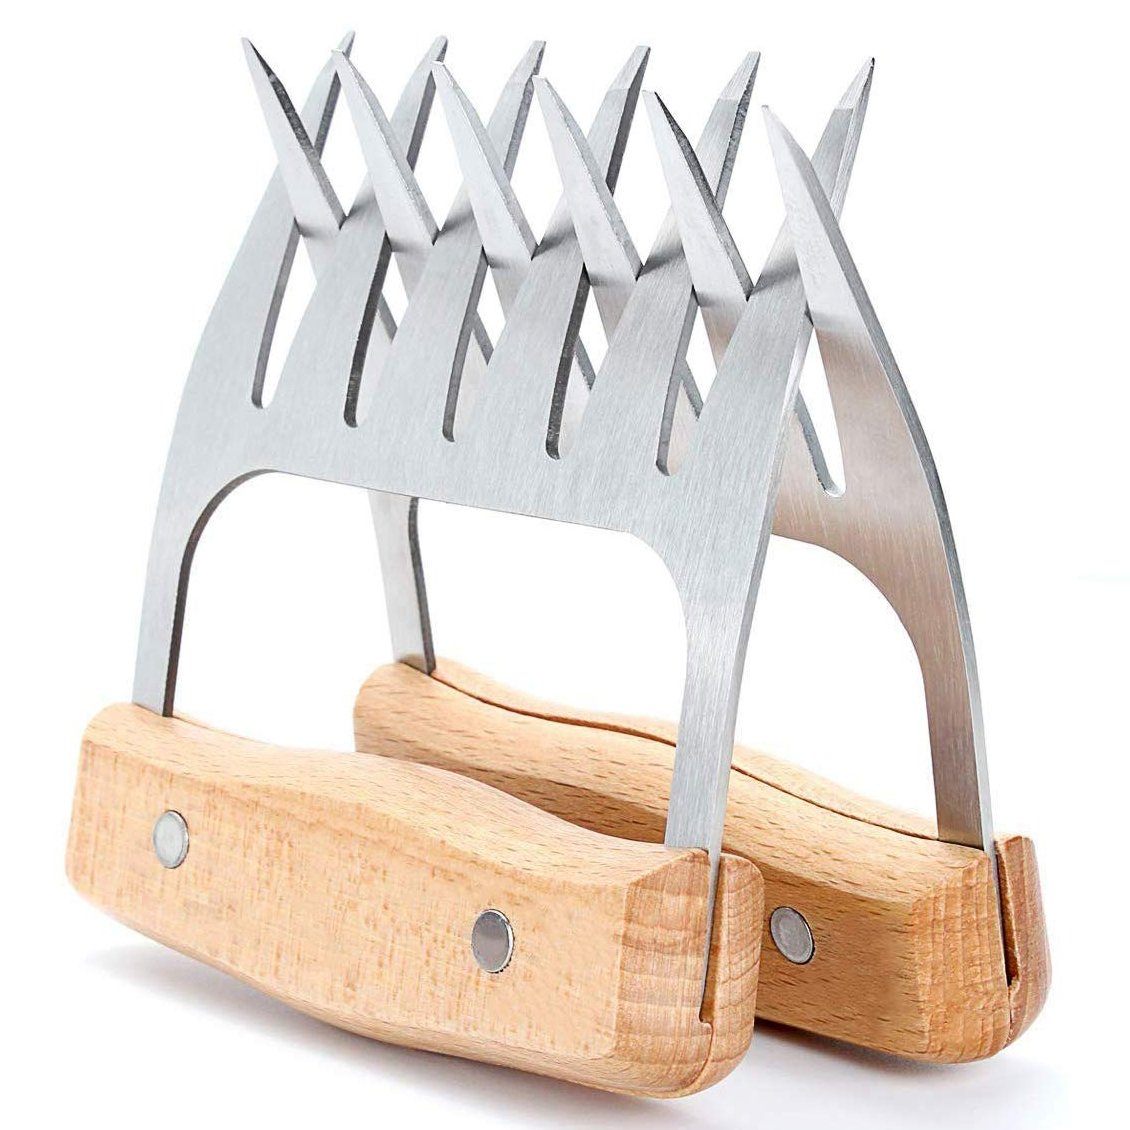 Stainless Steel Meat-Shredding Claws with Wooden Handle / Brown